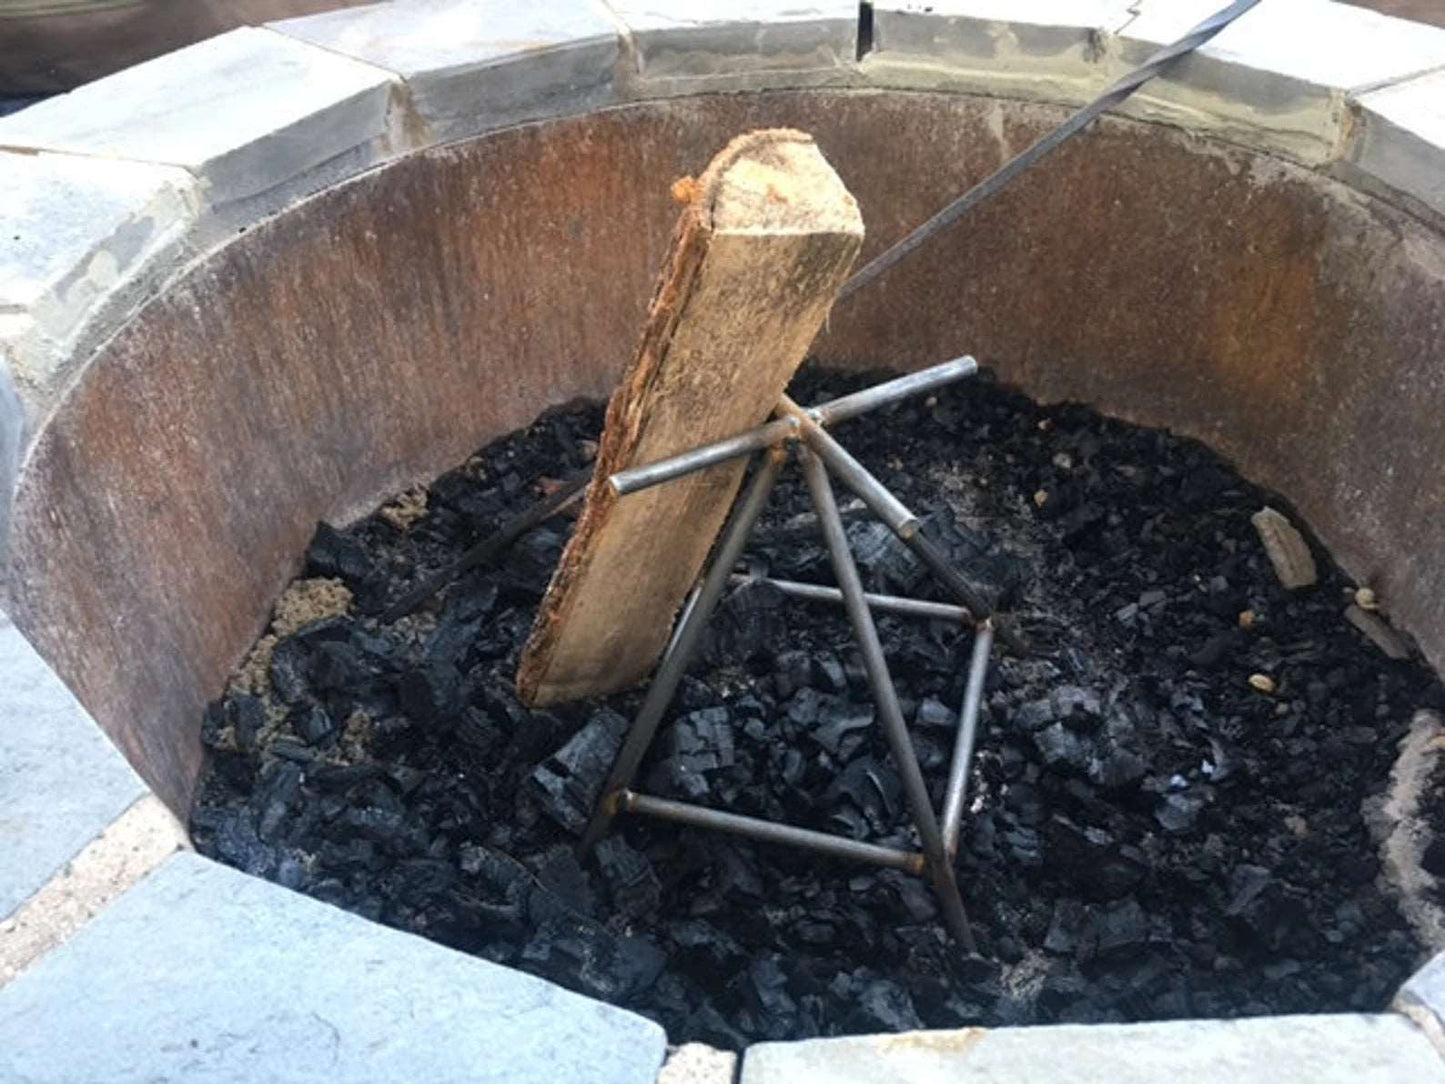 Fire pit grate - metalit